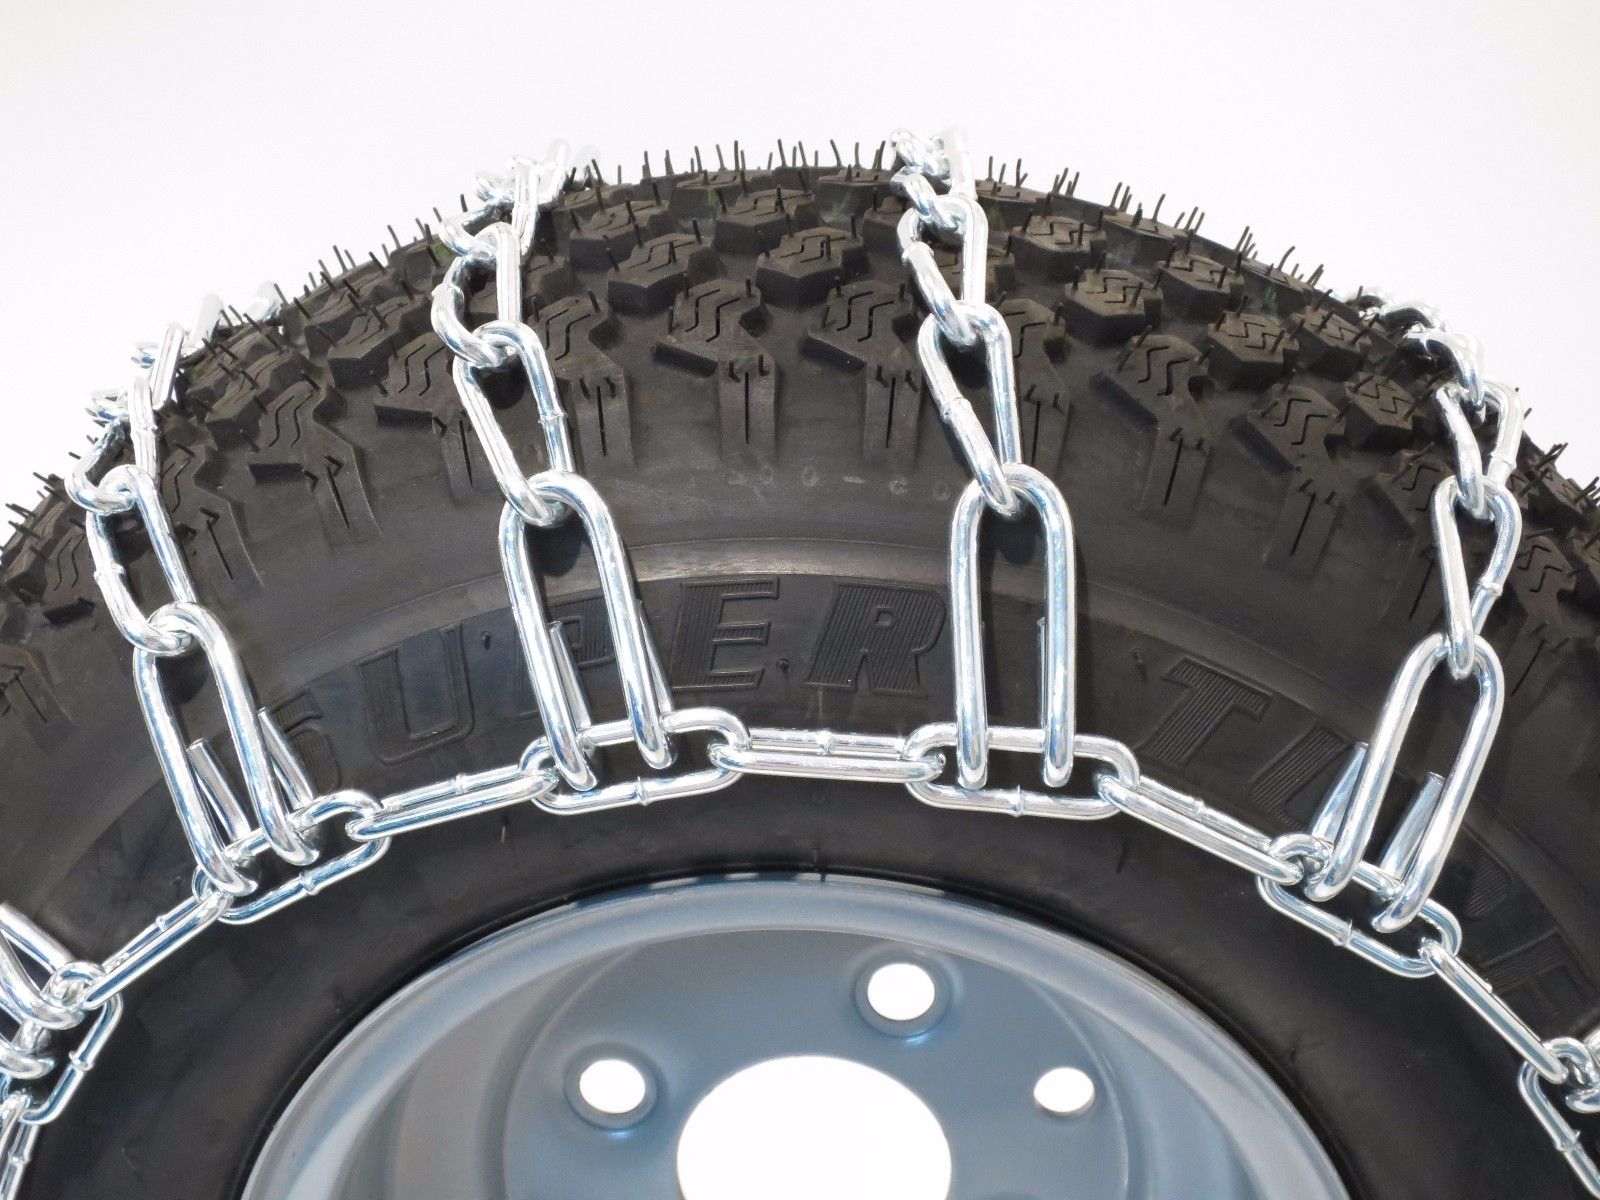 The ROP Shop | Pair 2 Link Tire Chains 18x8.5x8 For Simplicty Lawn Mower Garden Tractor Rider. TRS Part Number: 100149 - image 2 of 5